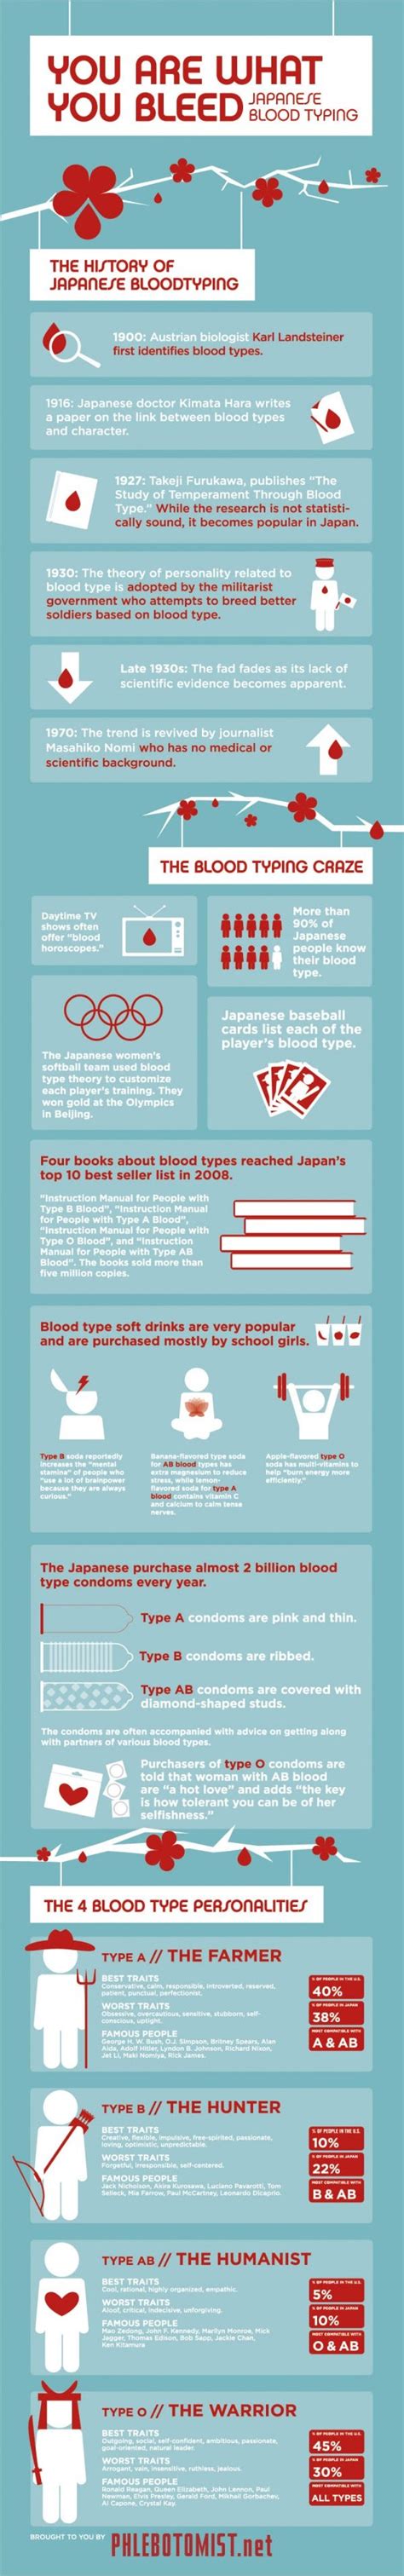 They are described to be analytical, inventive, detail oriented, creative, good listeners and sensitive to the needs of others. Ai Nihon 愛日本: Why Your Blood Type Matters In Japan ...